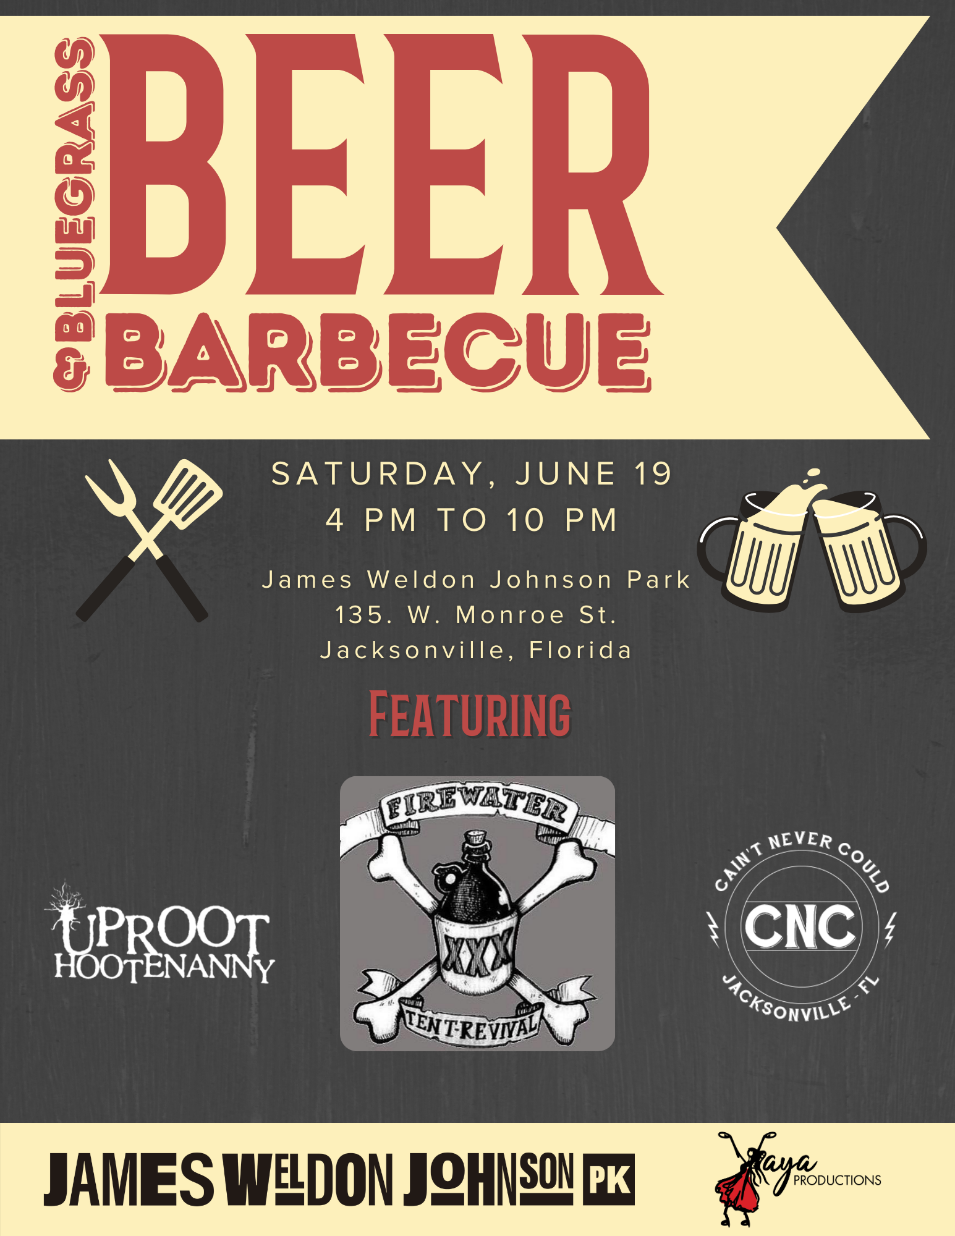 Bluegrass, Beer & Barbecue Festival 2021 flyer